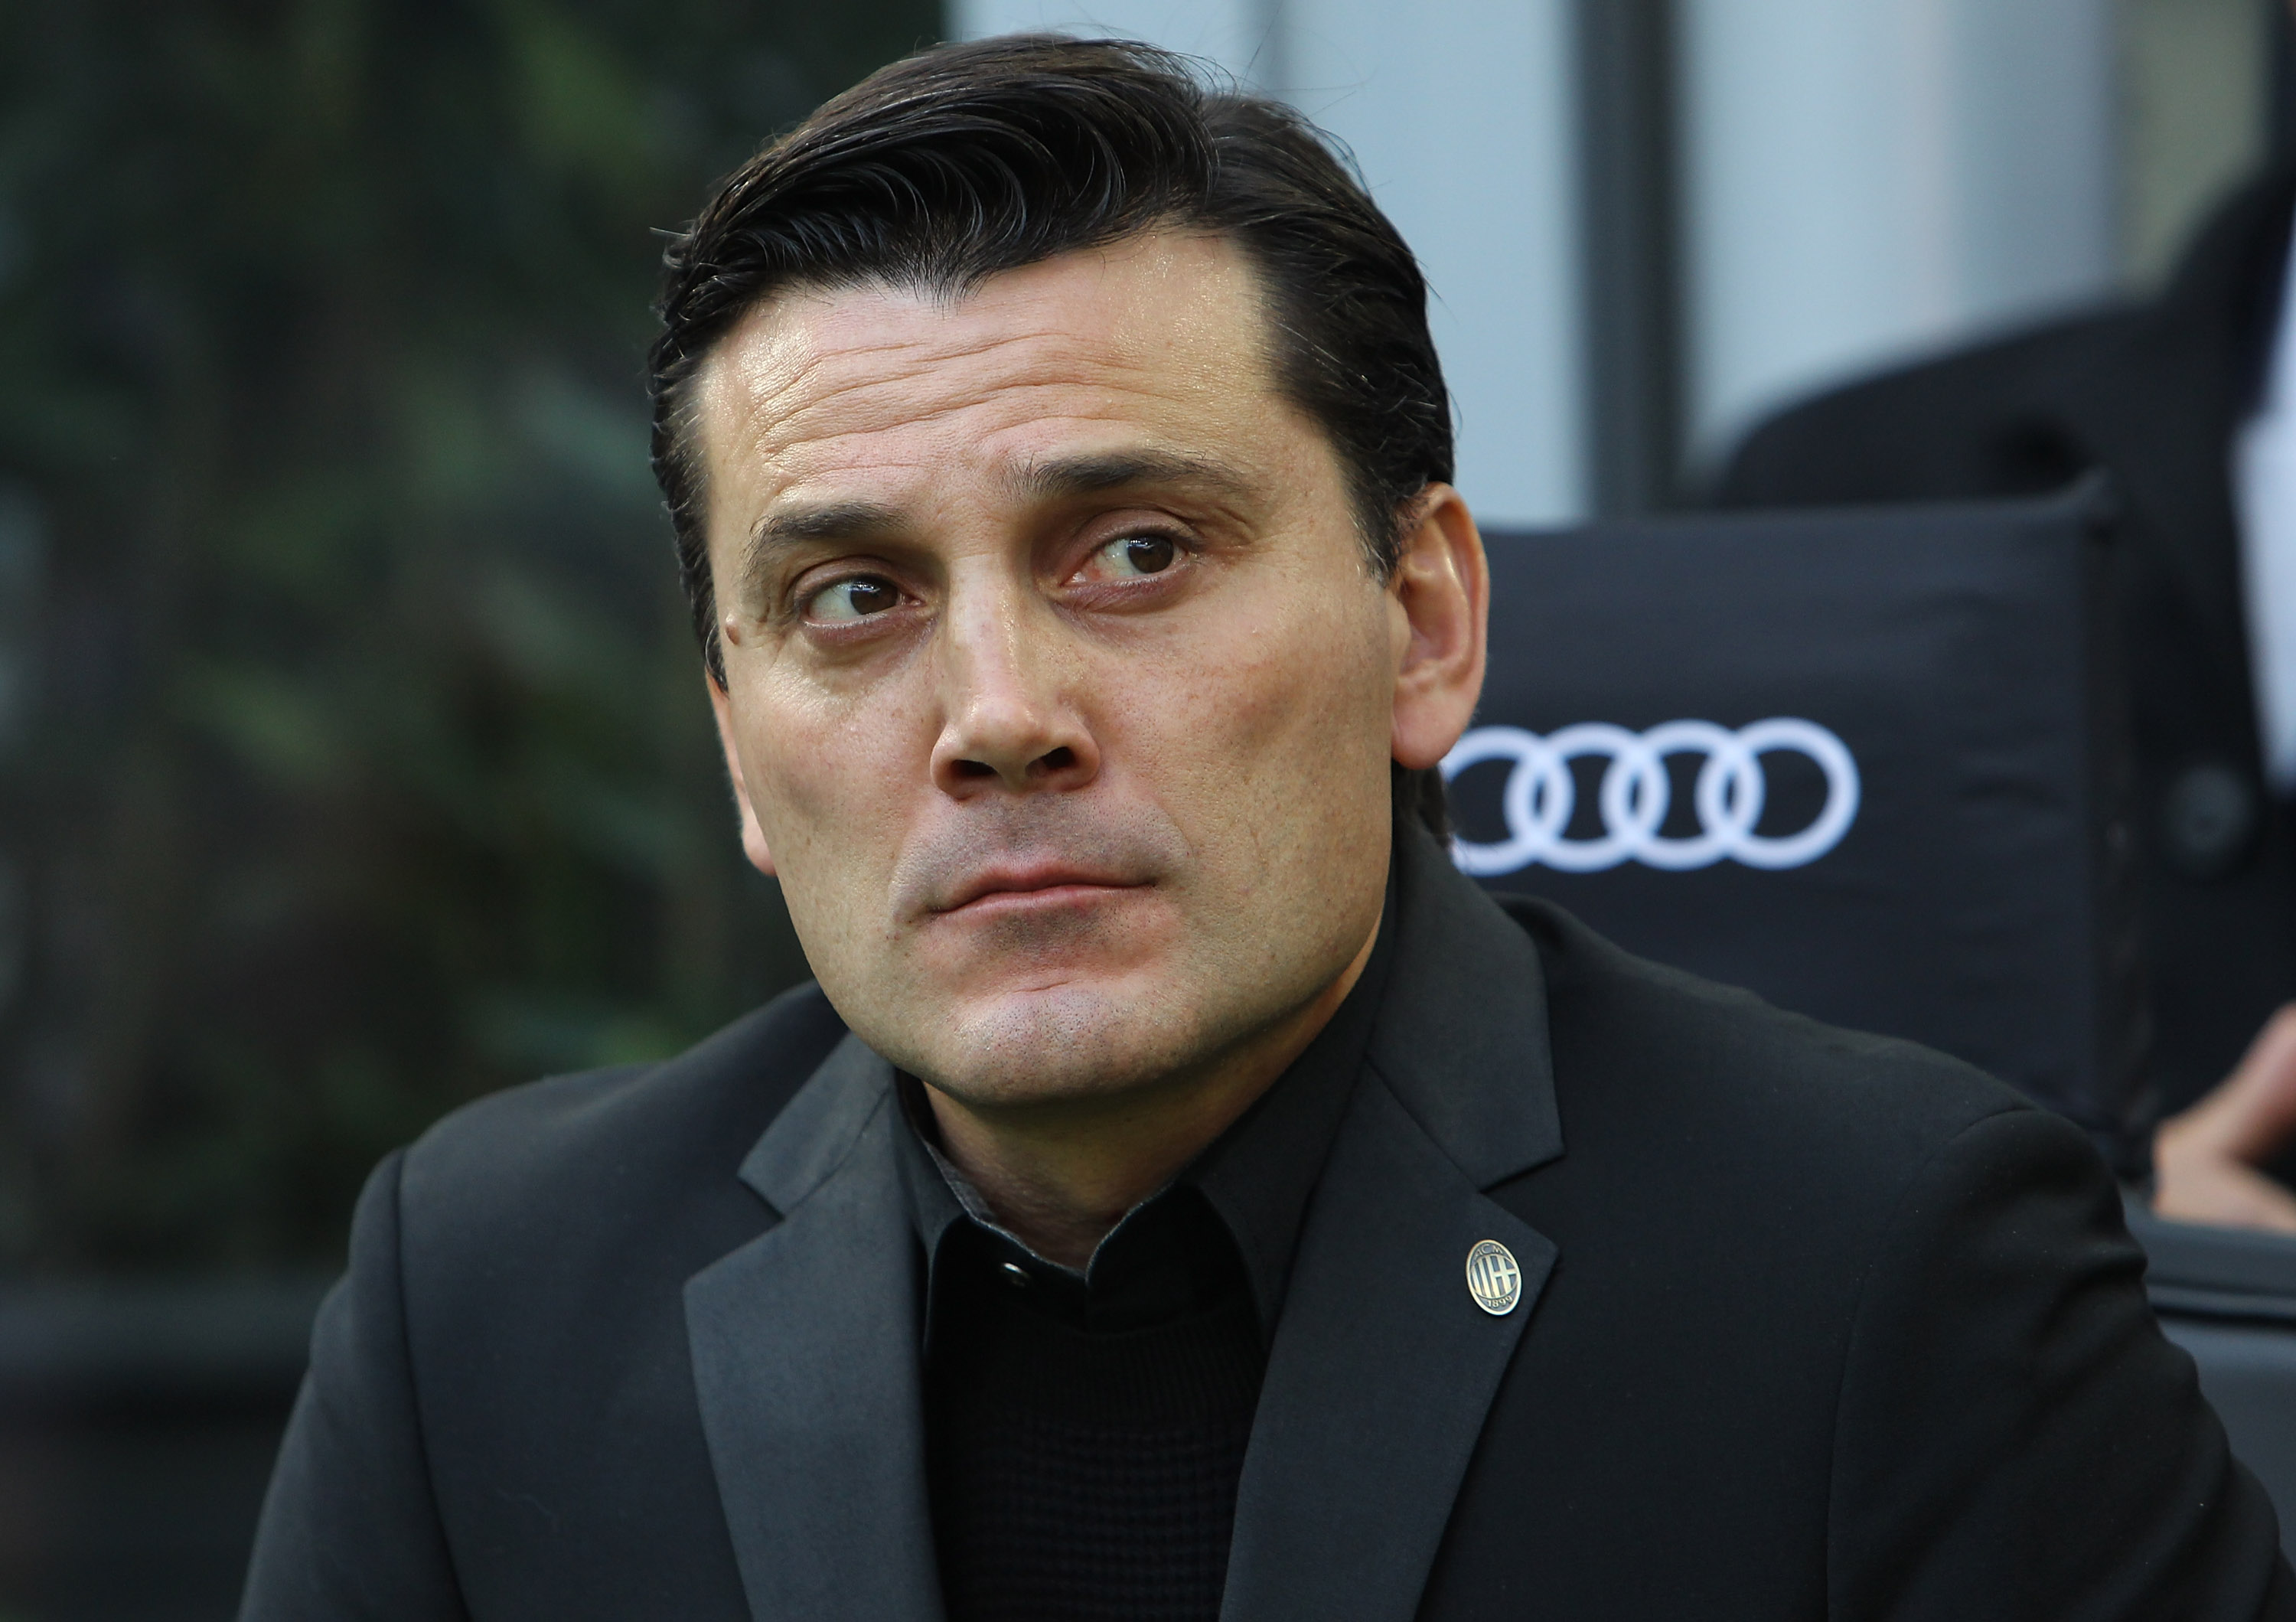 Fiorentina Coach Vincenzo Montella: “Inter Are A Strong Team That Are Deservedly Fighting With Juve For First Place”